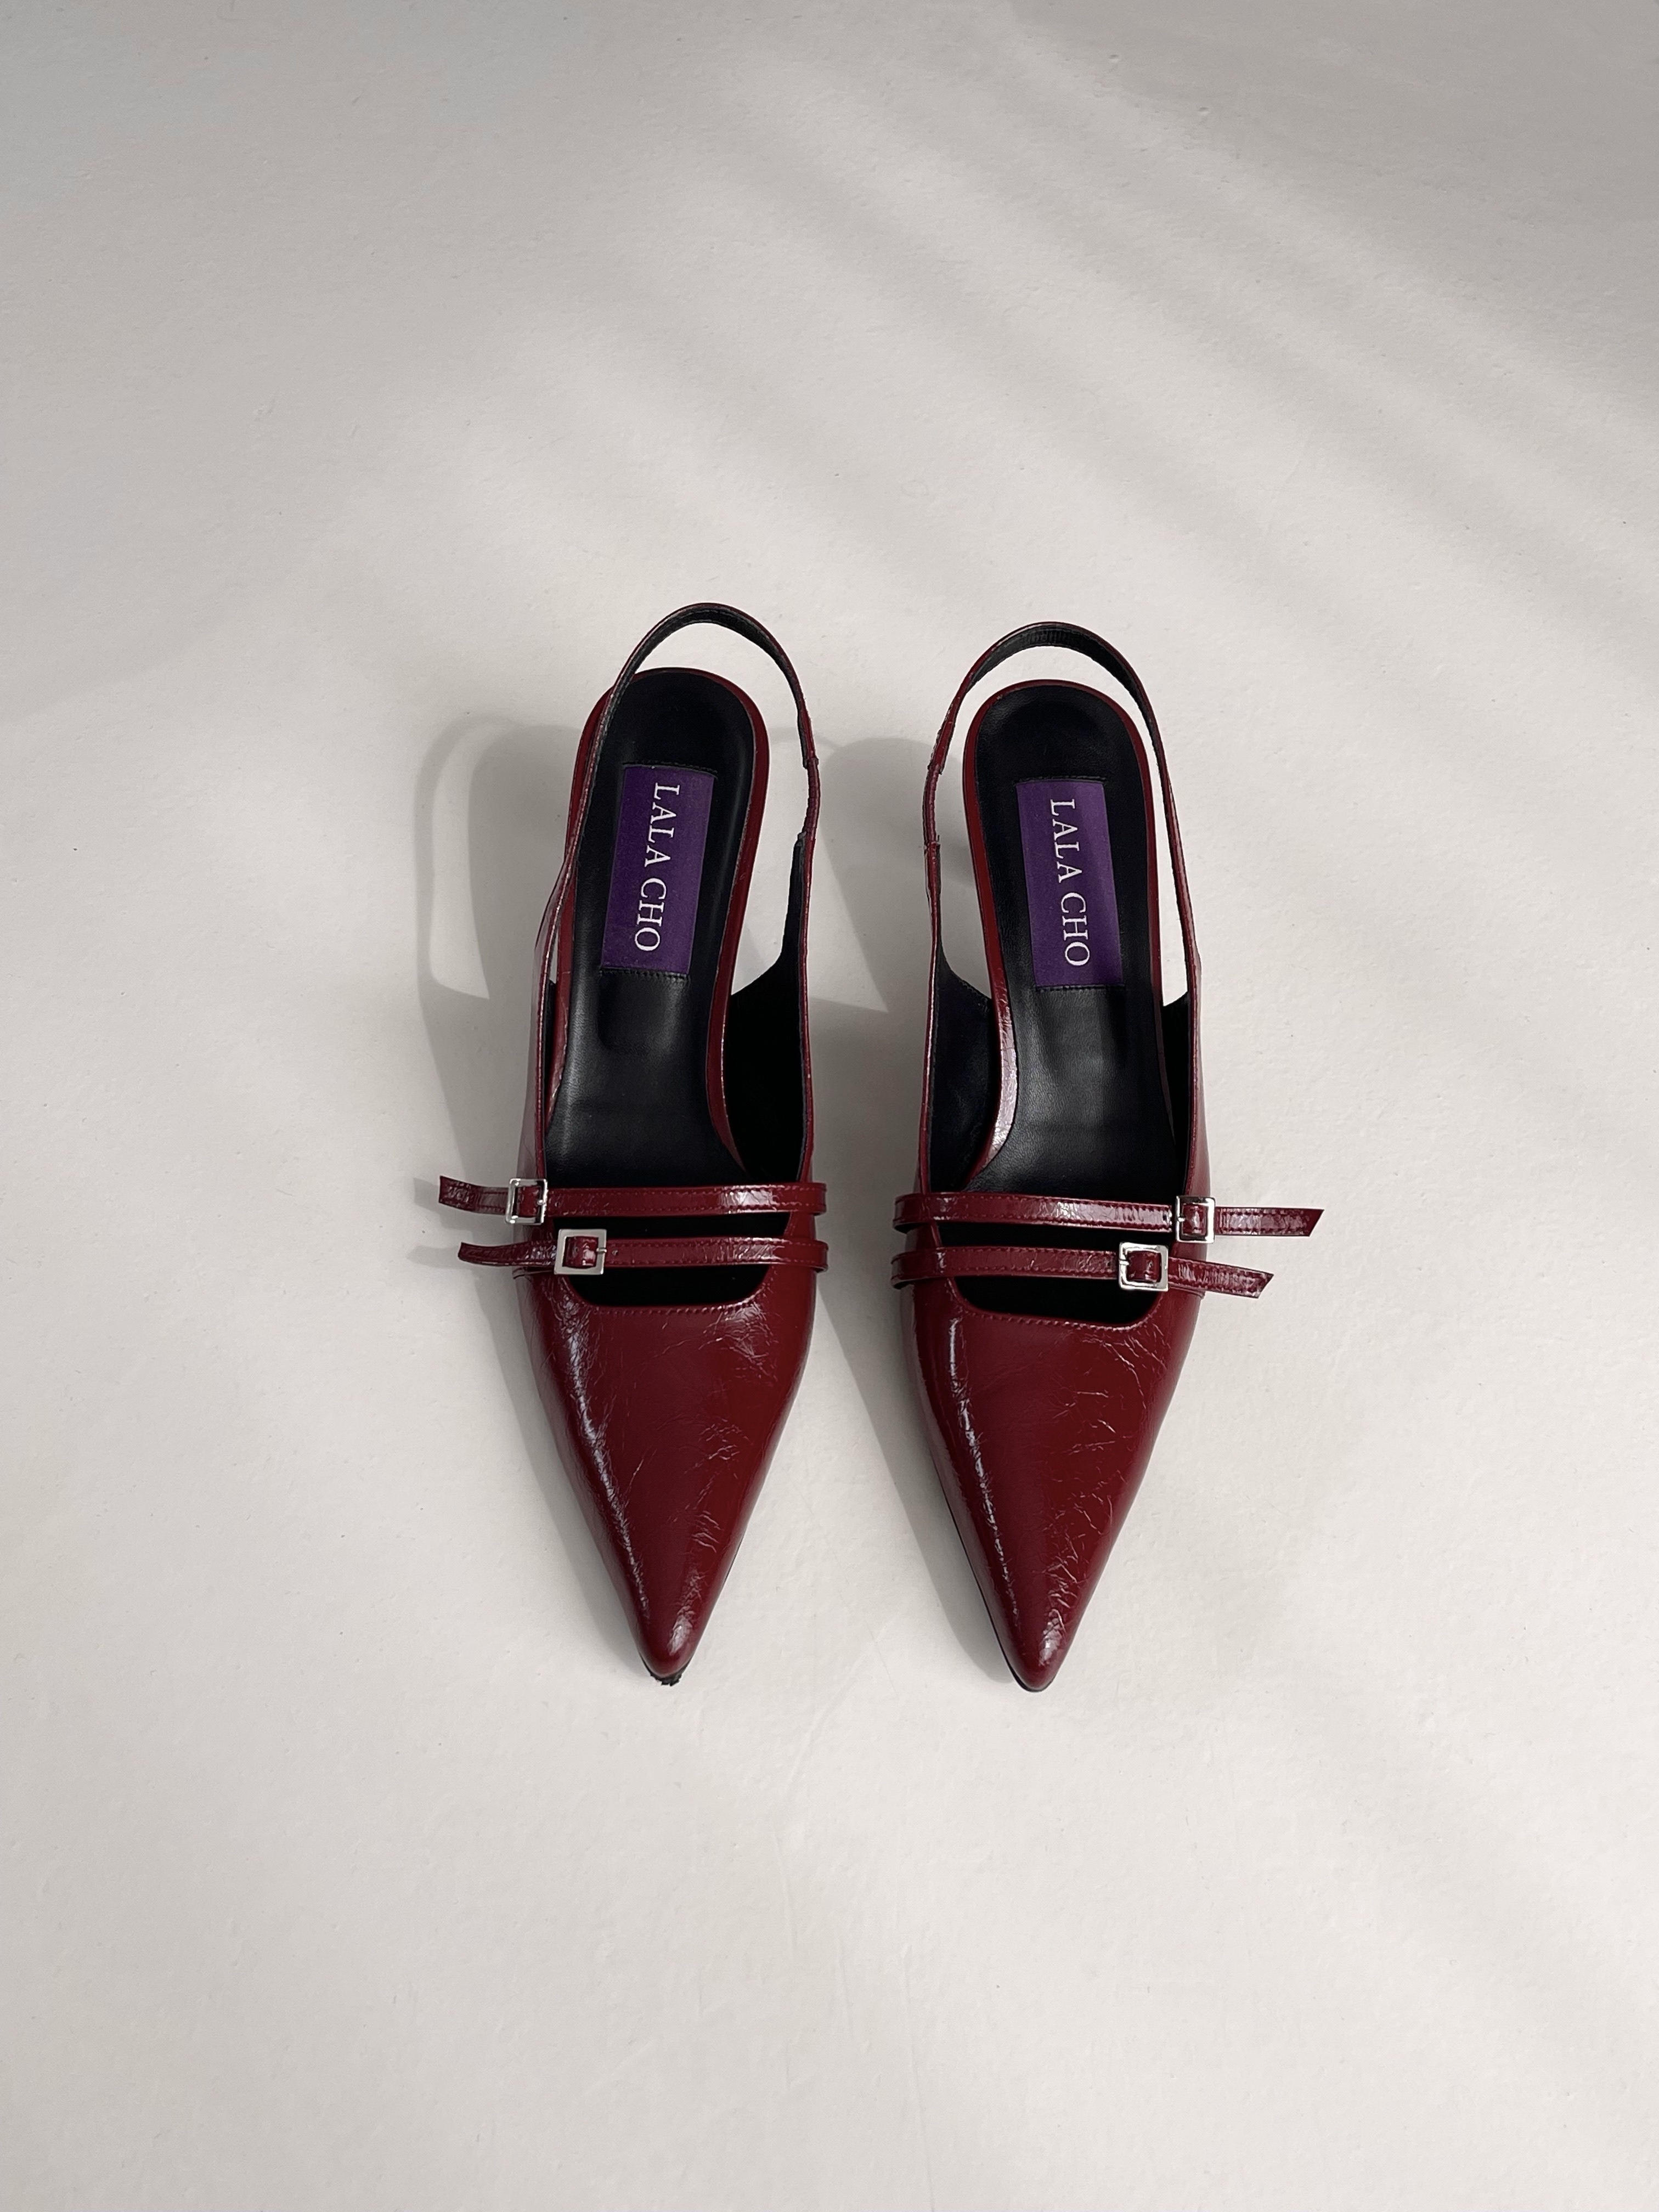 n.1 two-buckle stiletto slingback , wine red